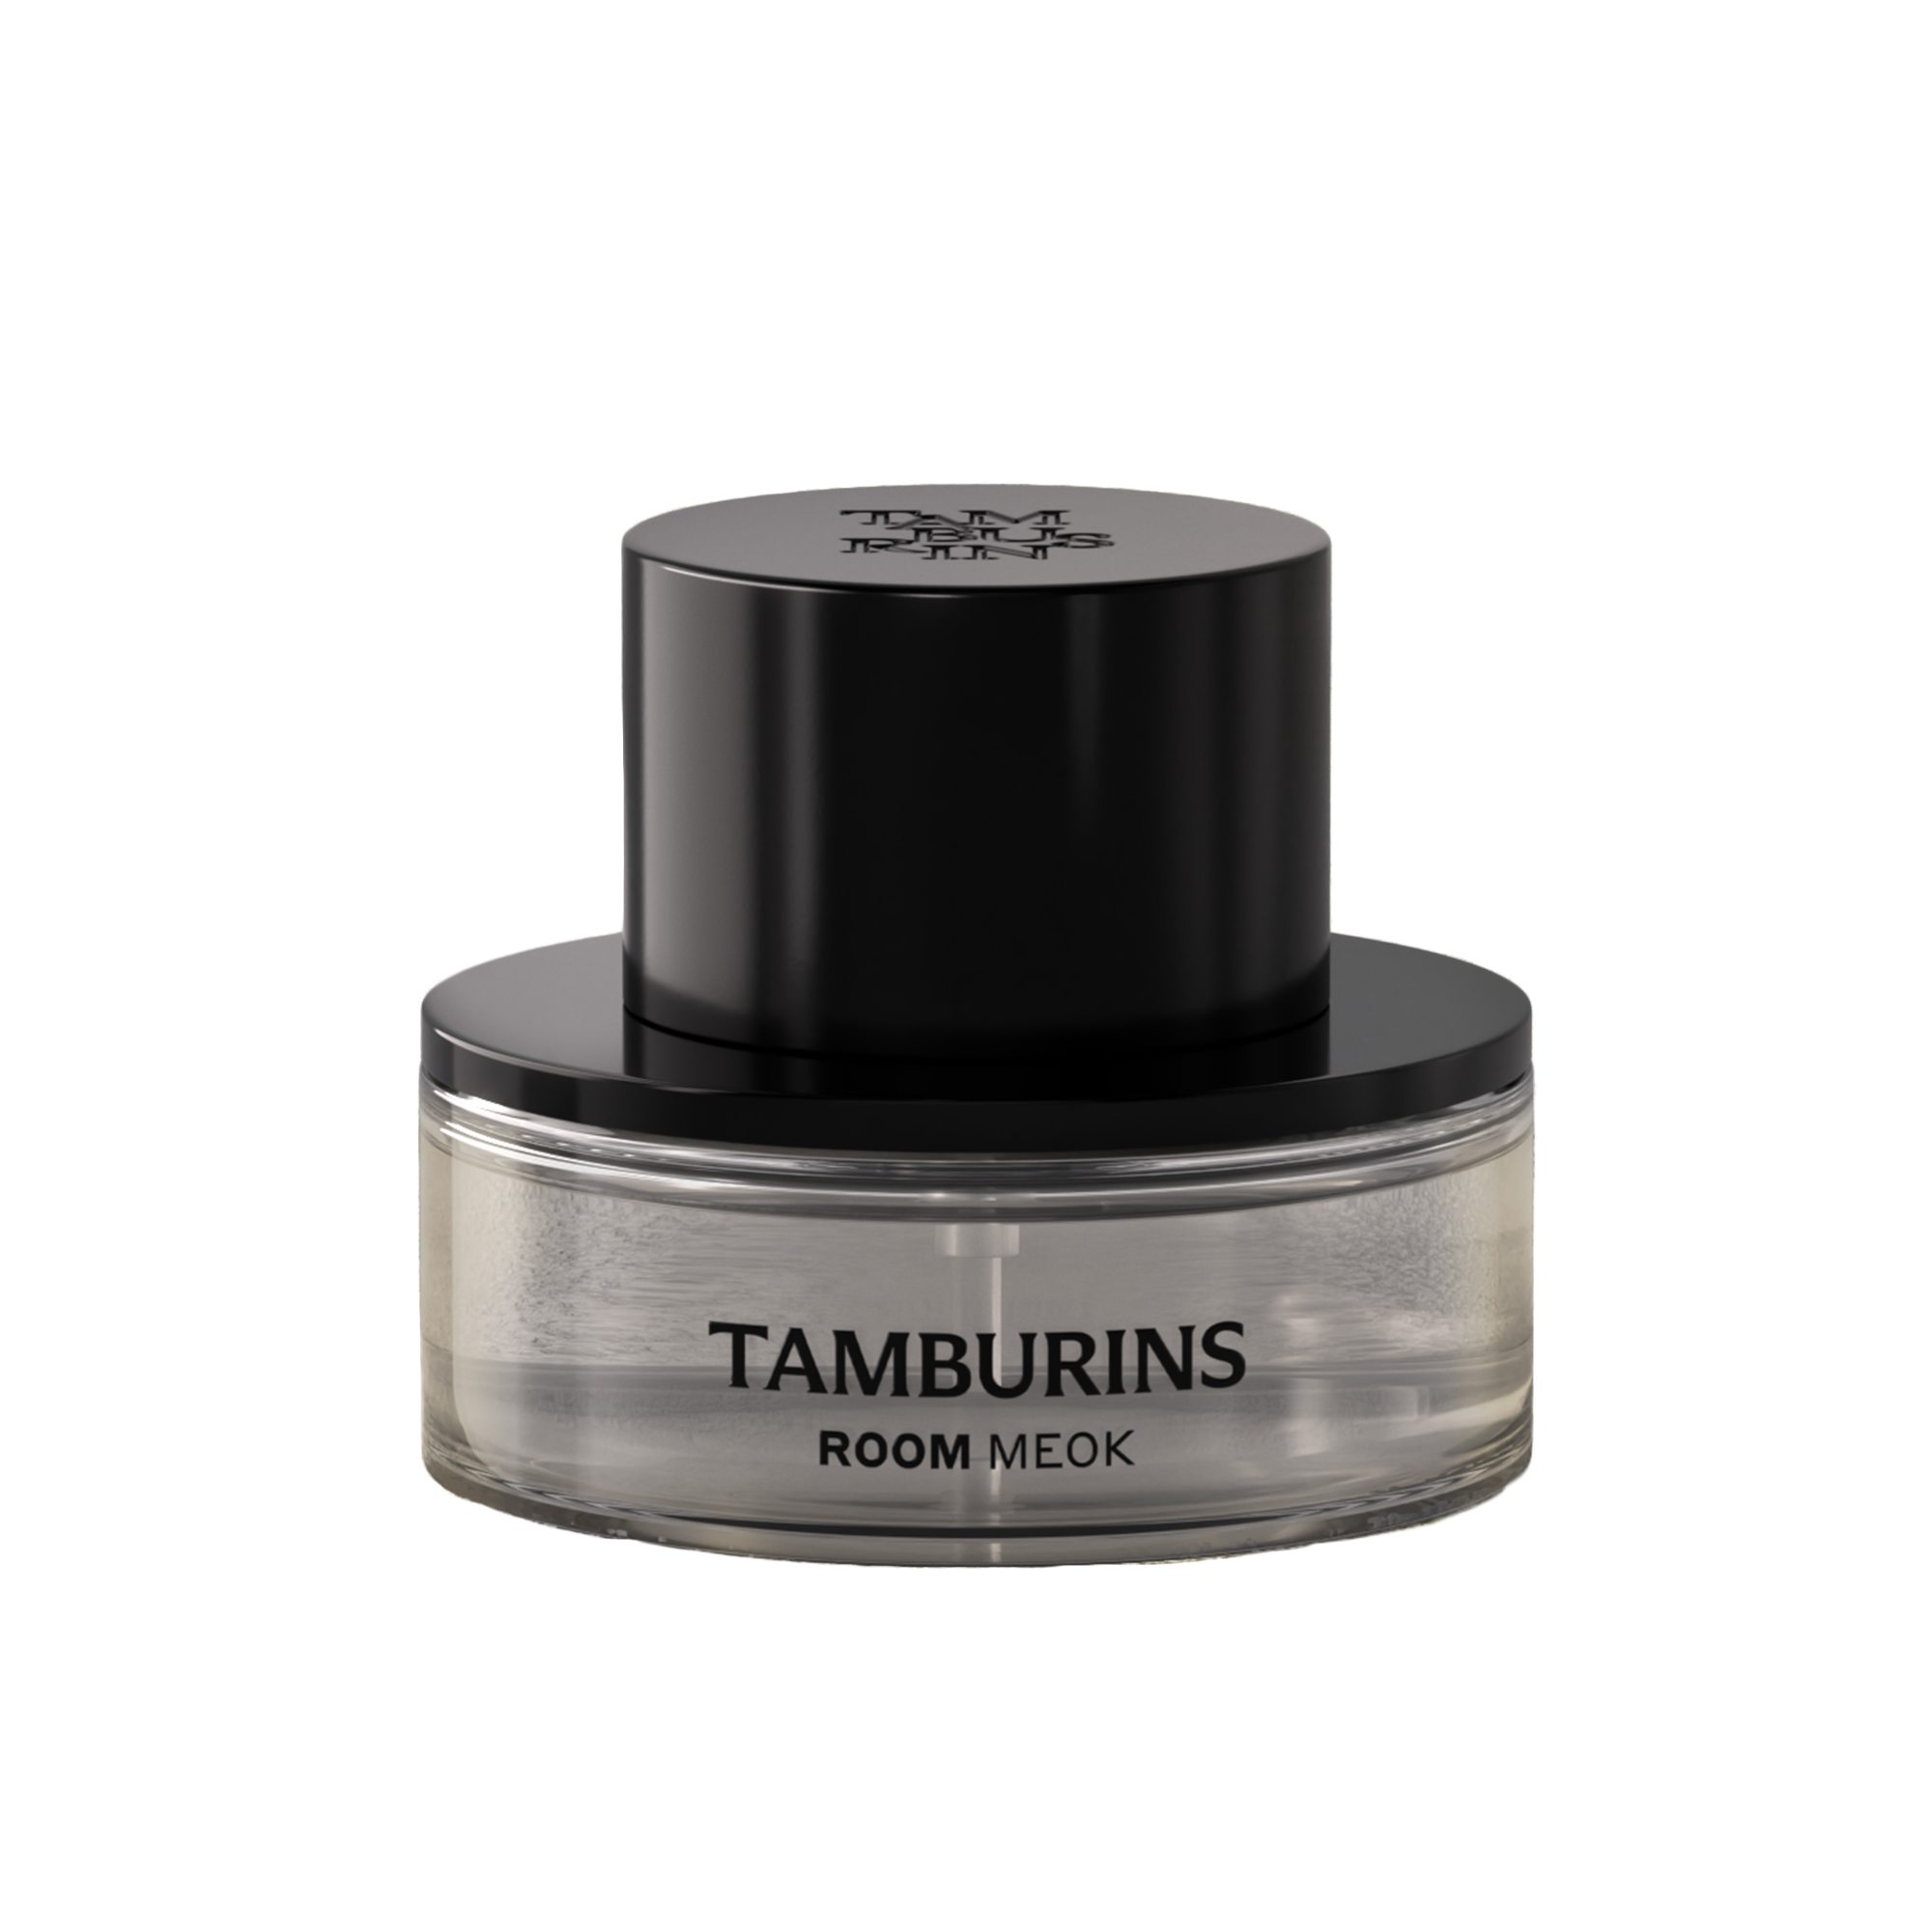 A 90ml bottle of TAMBURINS Room Spray in black packaging, emitting a luxurious perfume scent.